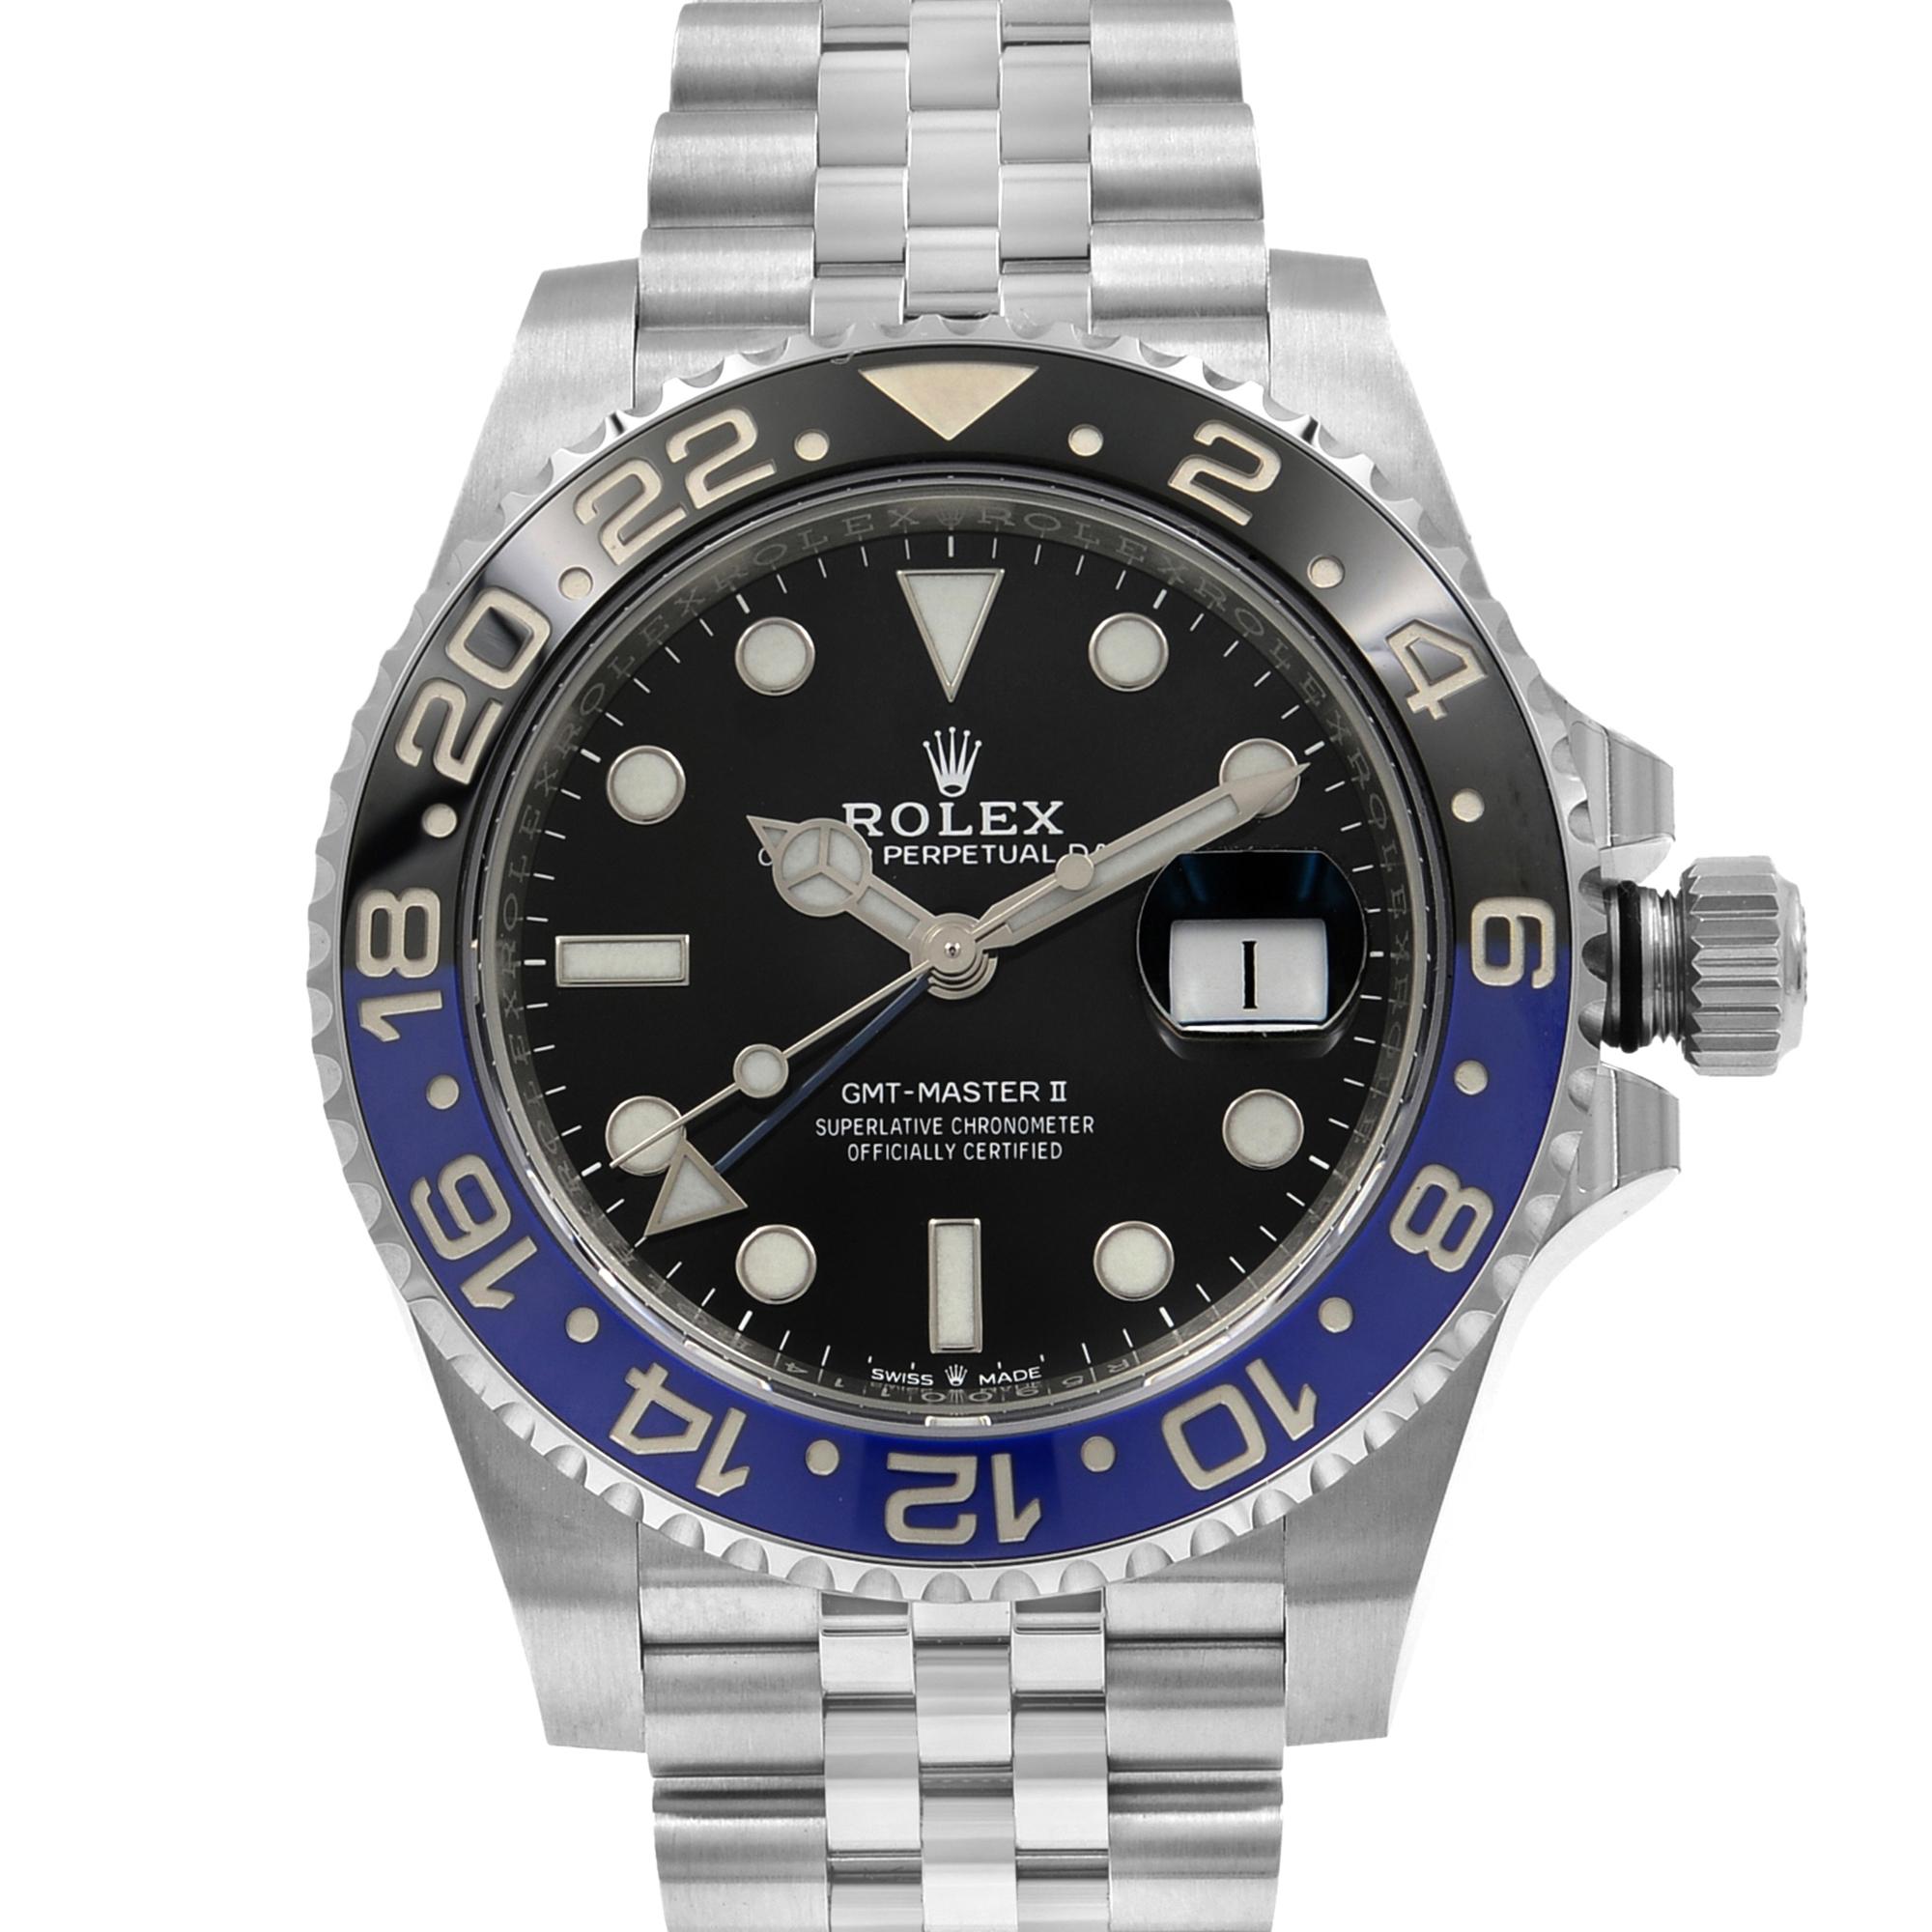 This brand new Rolex GMT-Master II 126710BLNR is a beautiful men's timepiece that is powered by an automatic movement which is cased in a stainless steel case. It has a round shape face, date, dual time dial, and has hand sticks & dots style